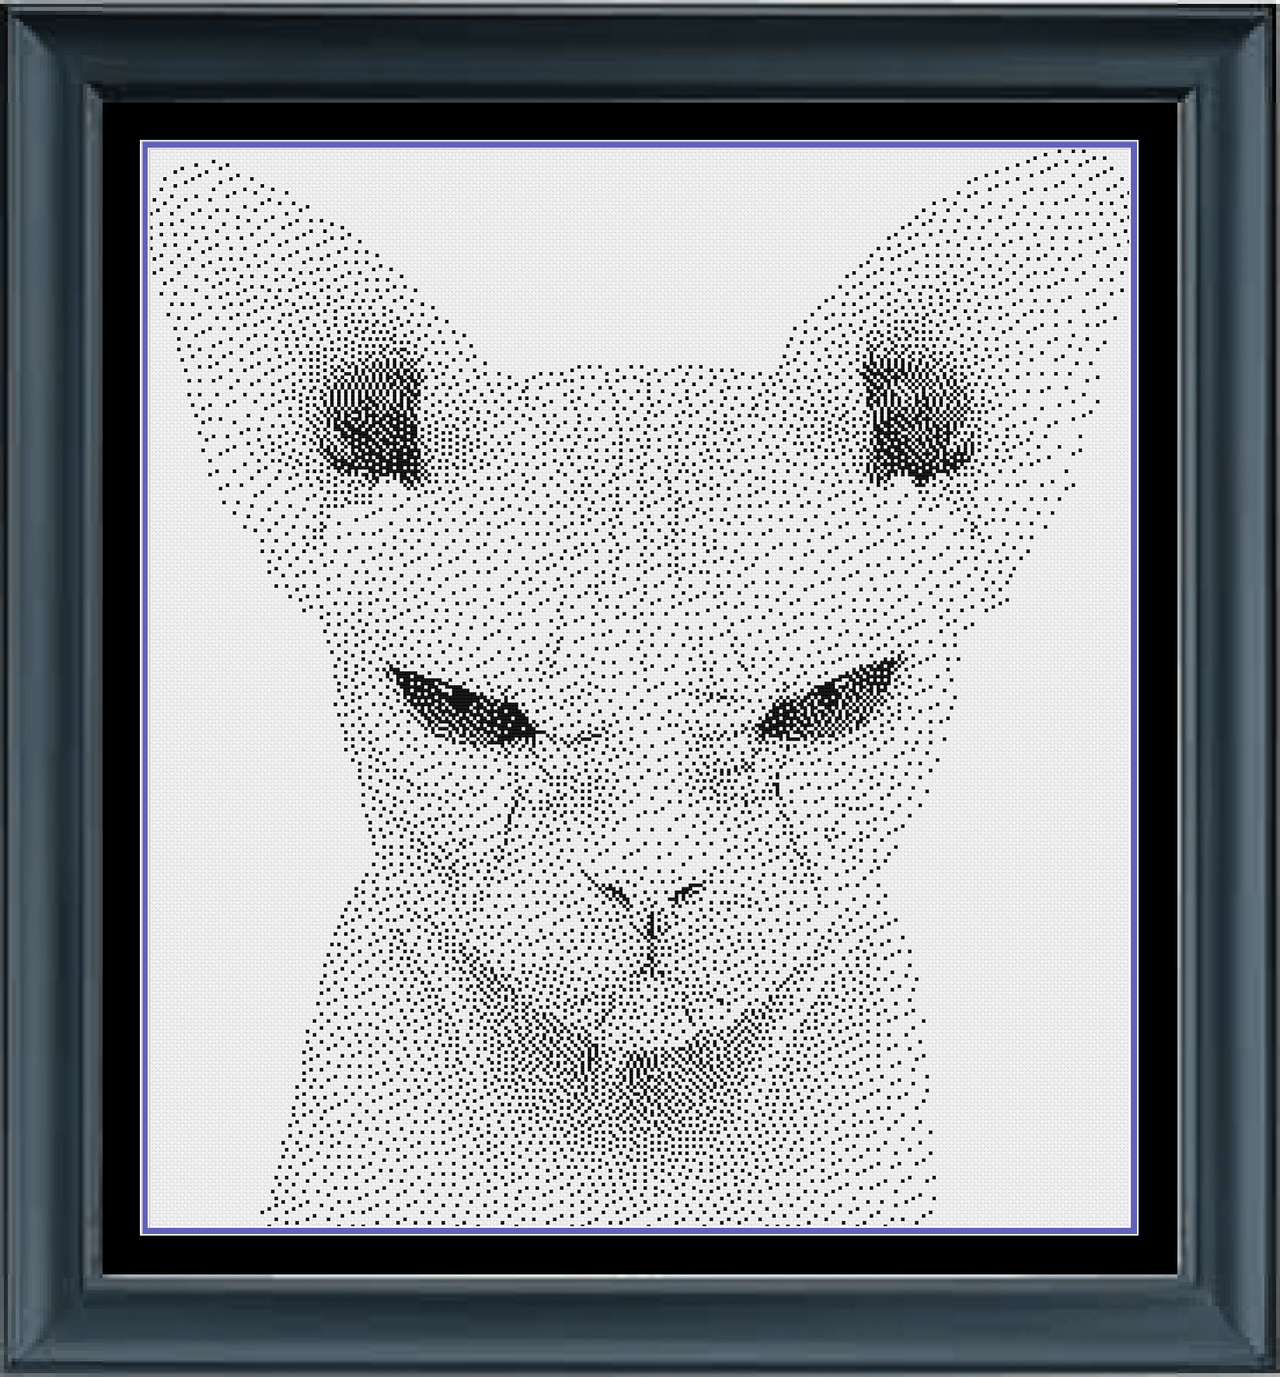 Stitching Jules Design Cross Stitch Pattern Manx Cross Stitch Pattern | Cat Cross Stitch Pattern | Blackwork | Instant PDF Download And Physical Pattern Options